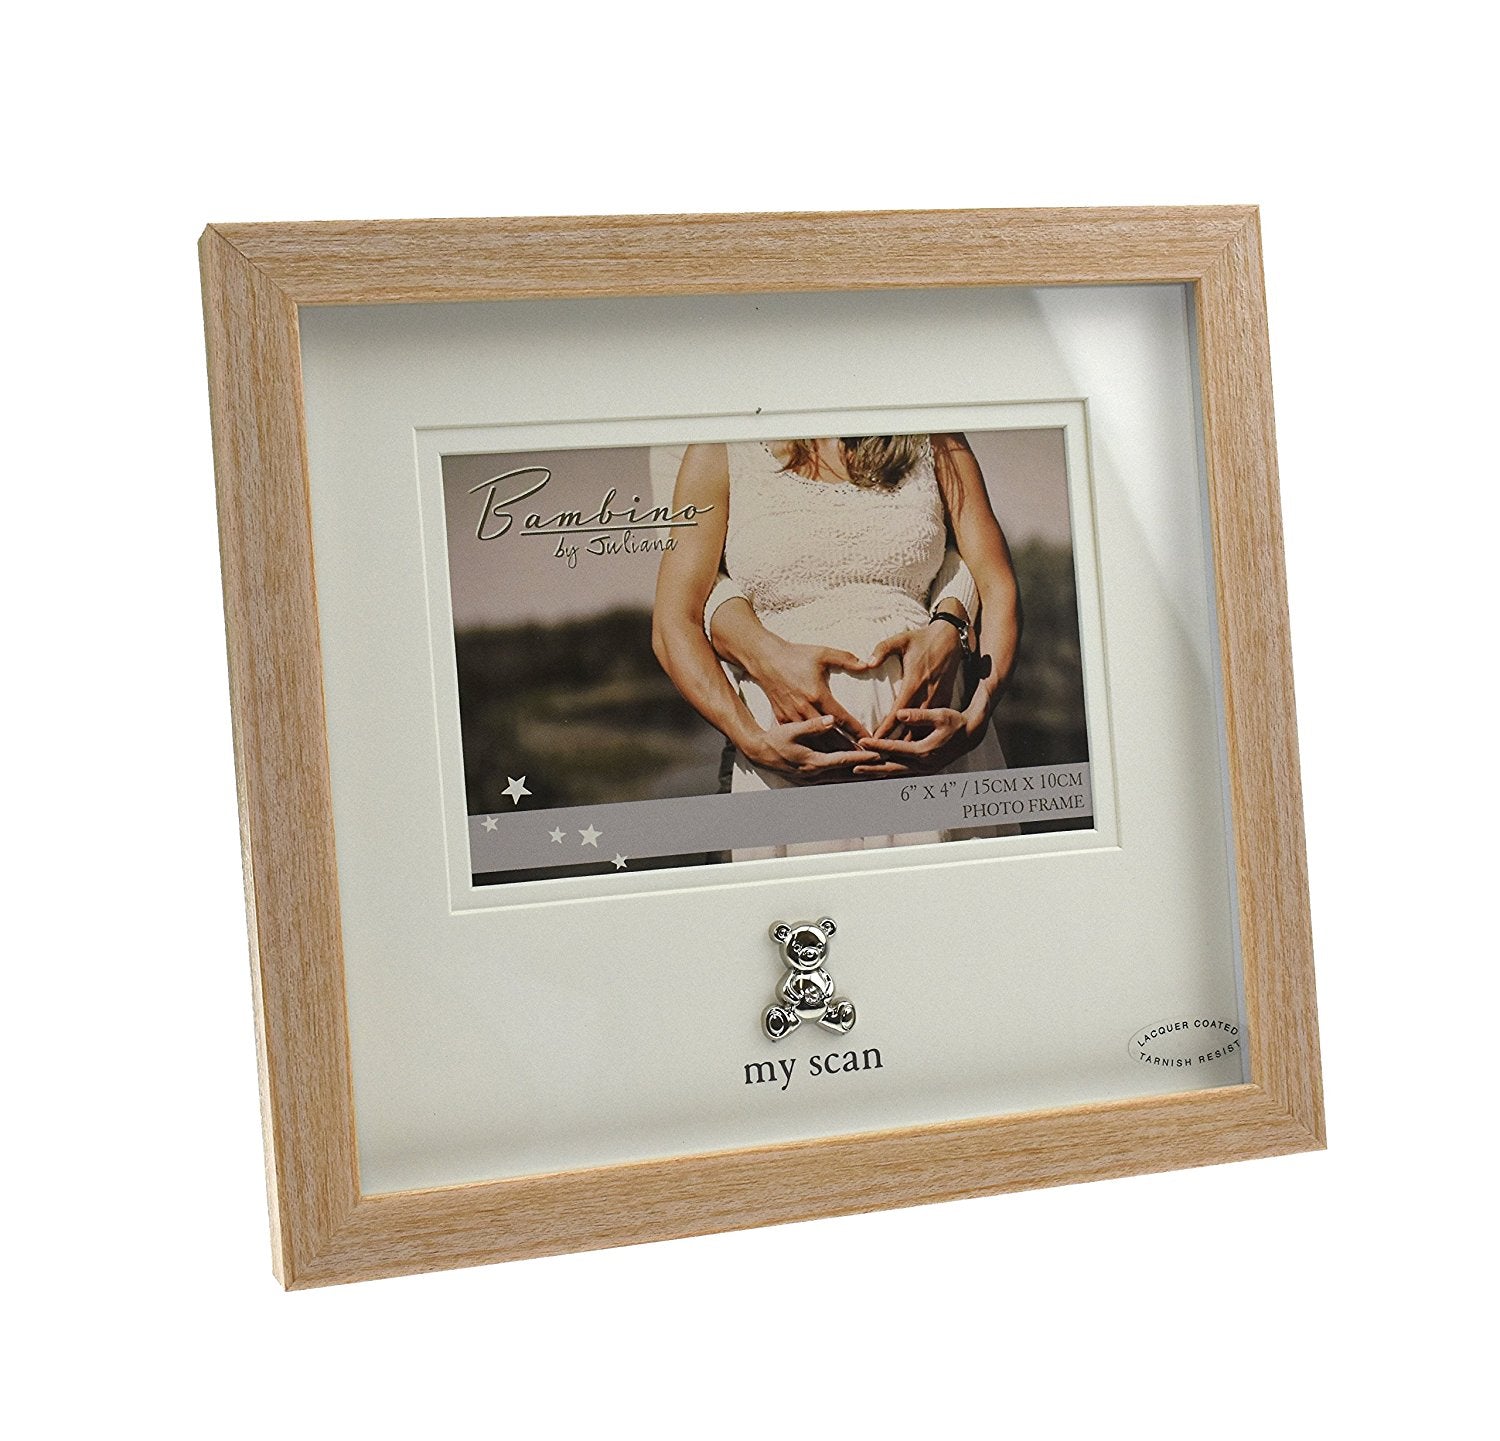 Bambino Light Wooden effect "My Scan"Picture Frame with Silver Pram Icon 6" x 4" - hanrattycraftsgifts.co.uk